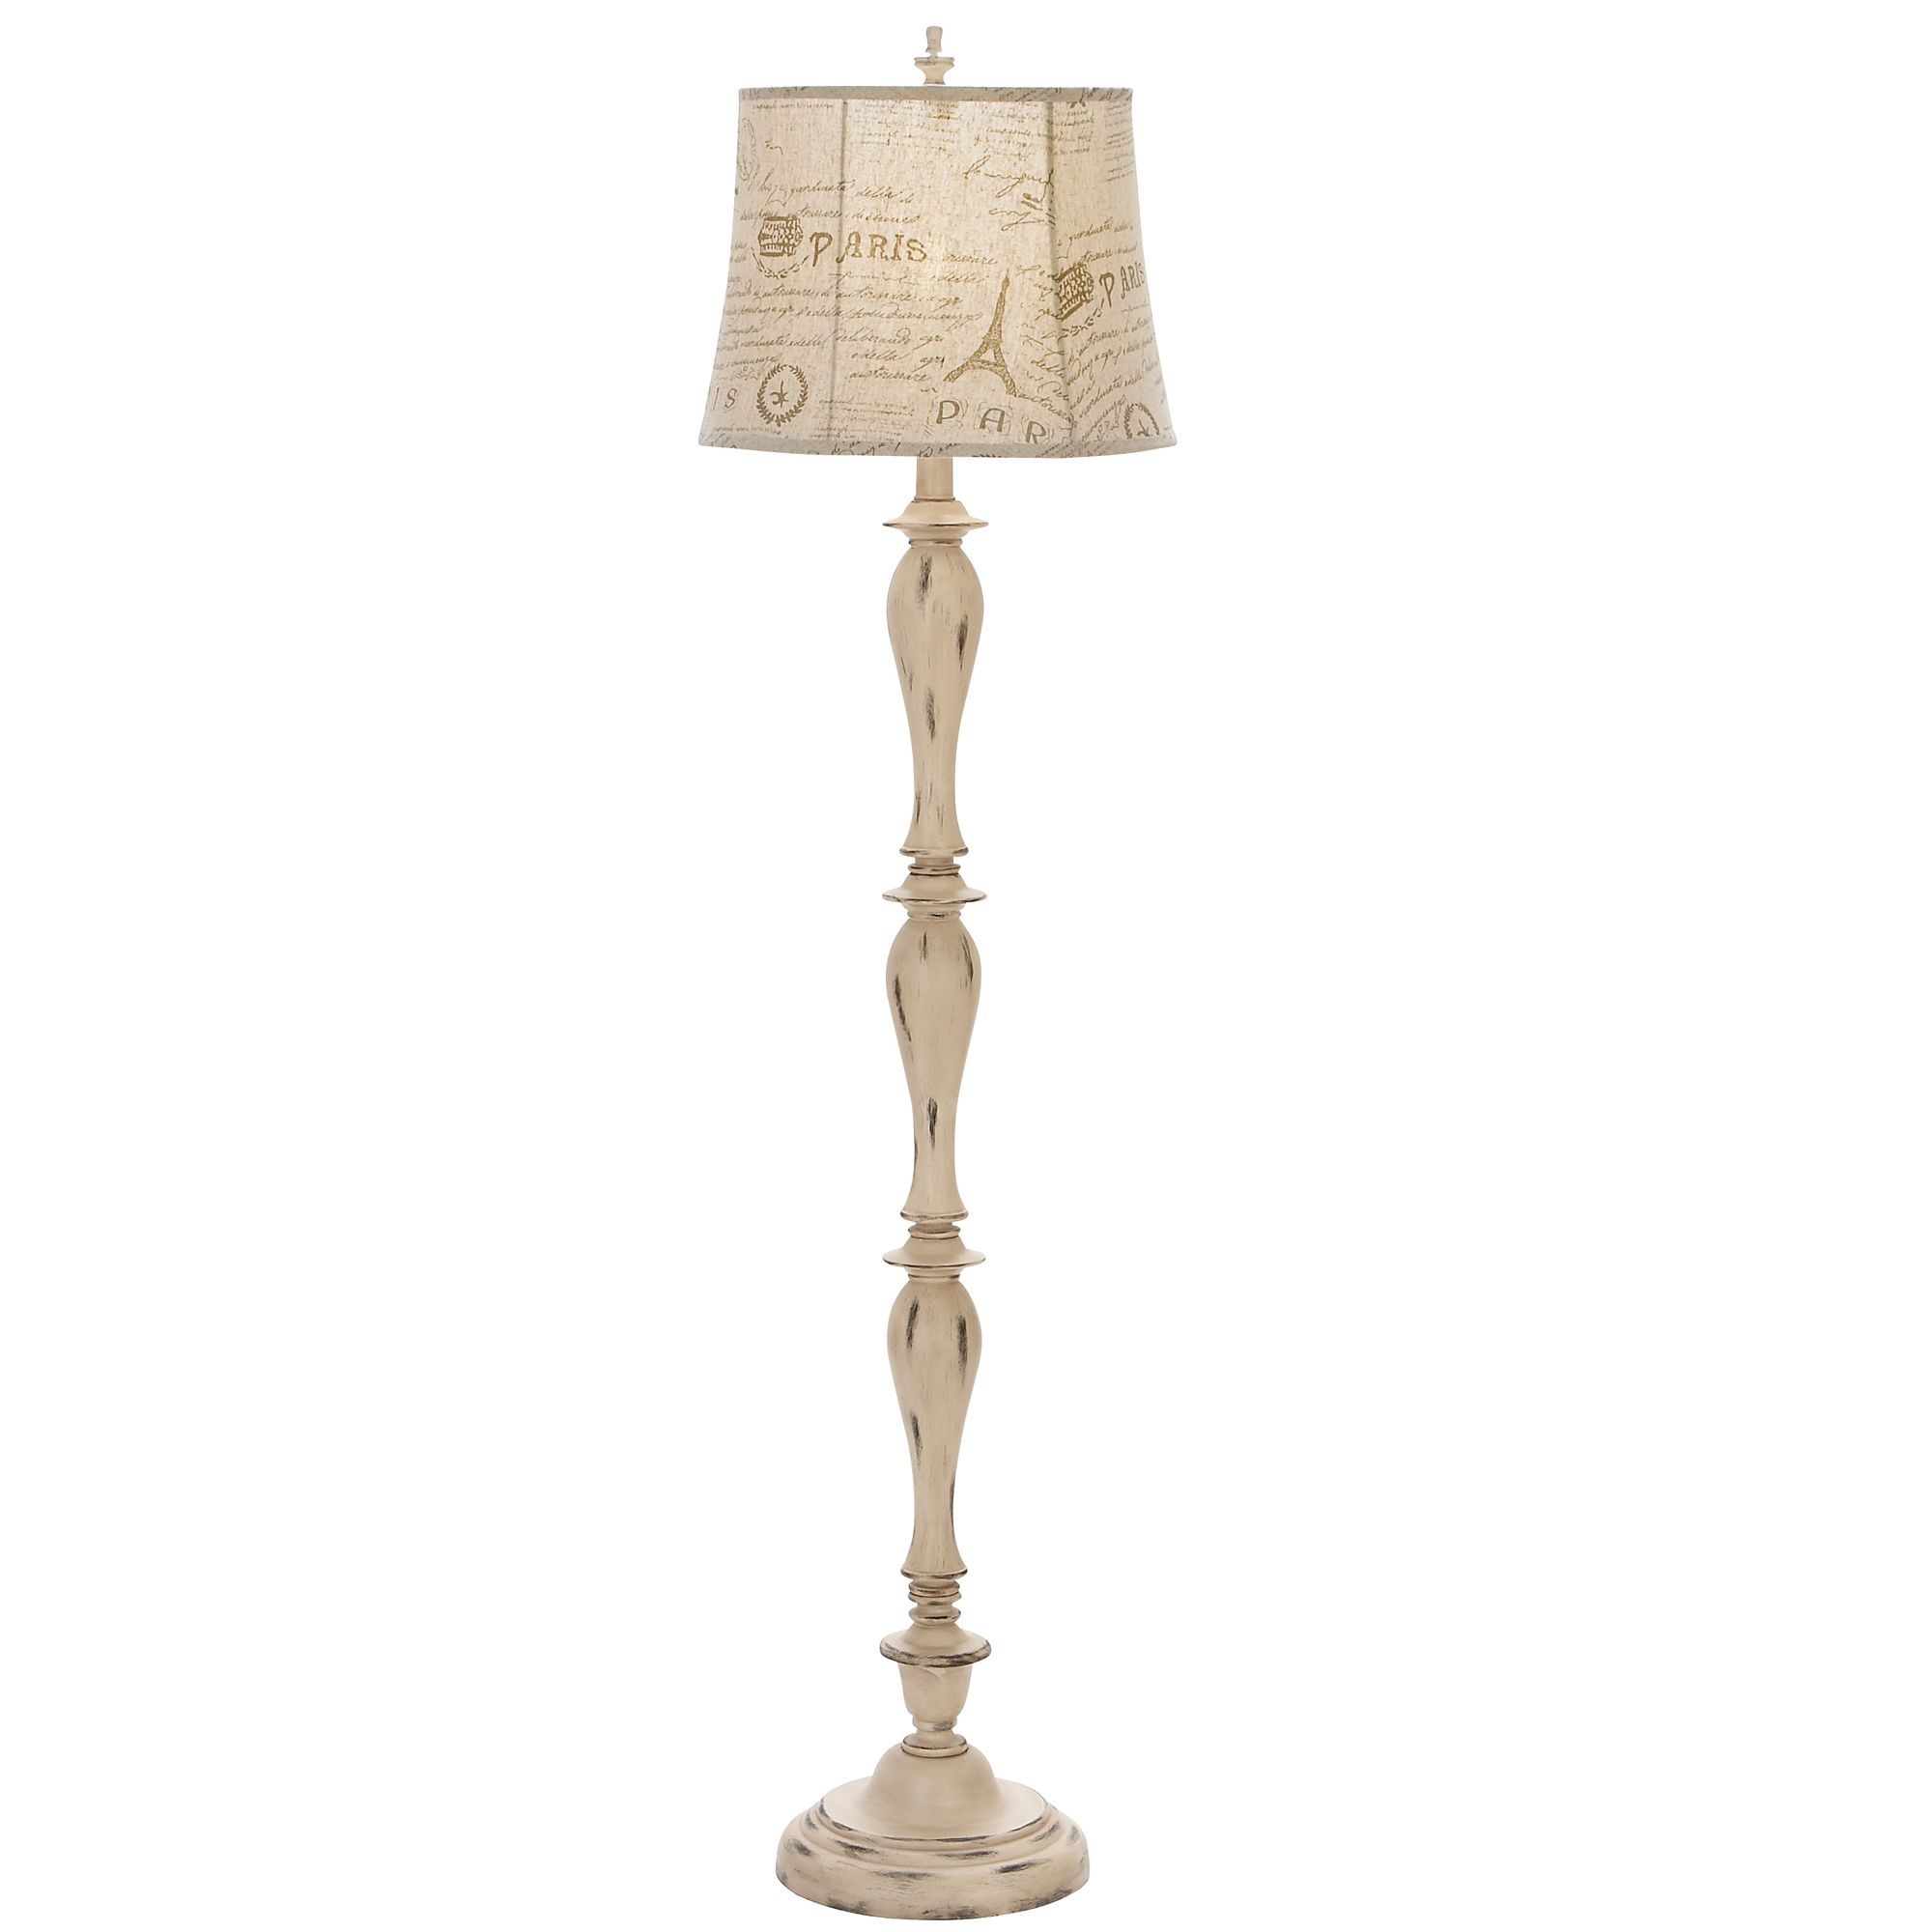 Casa cortes french architecture antiqued 64 inch floor lamp